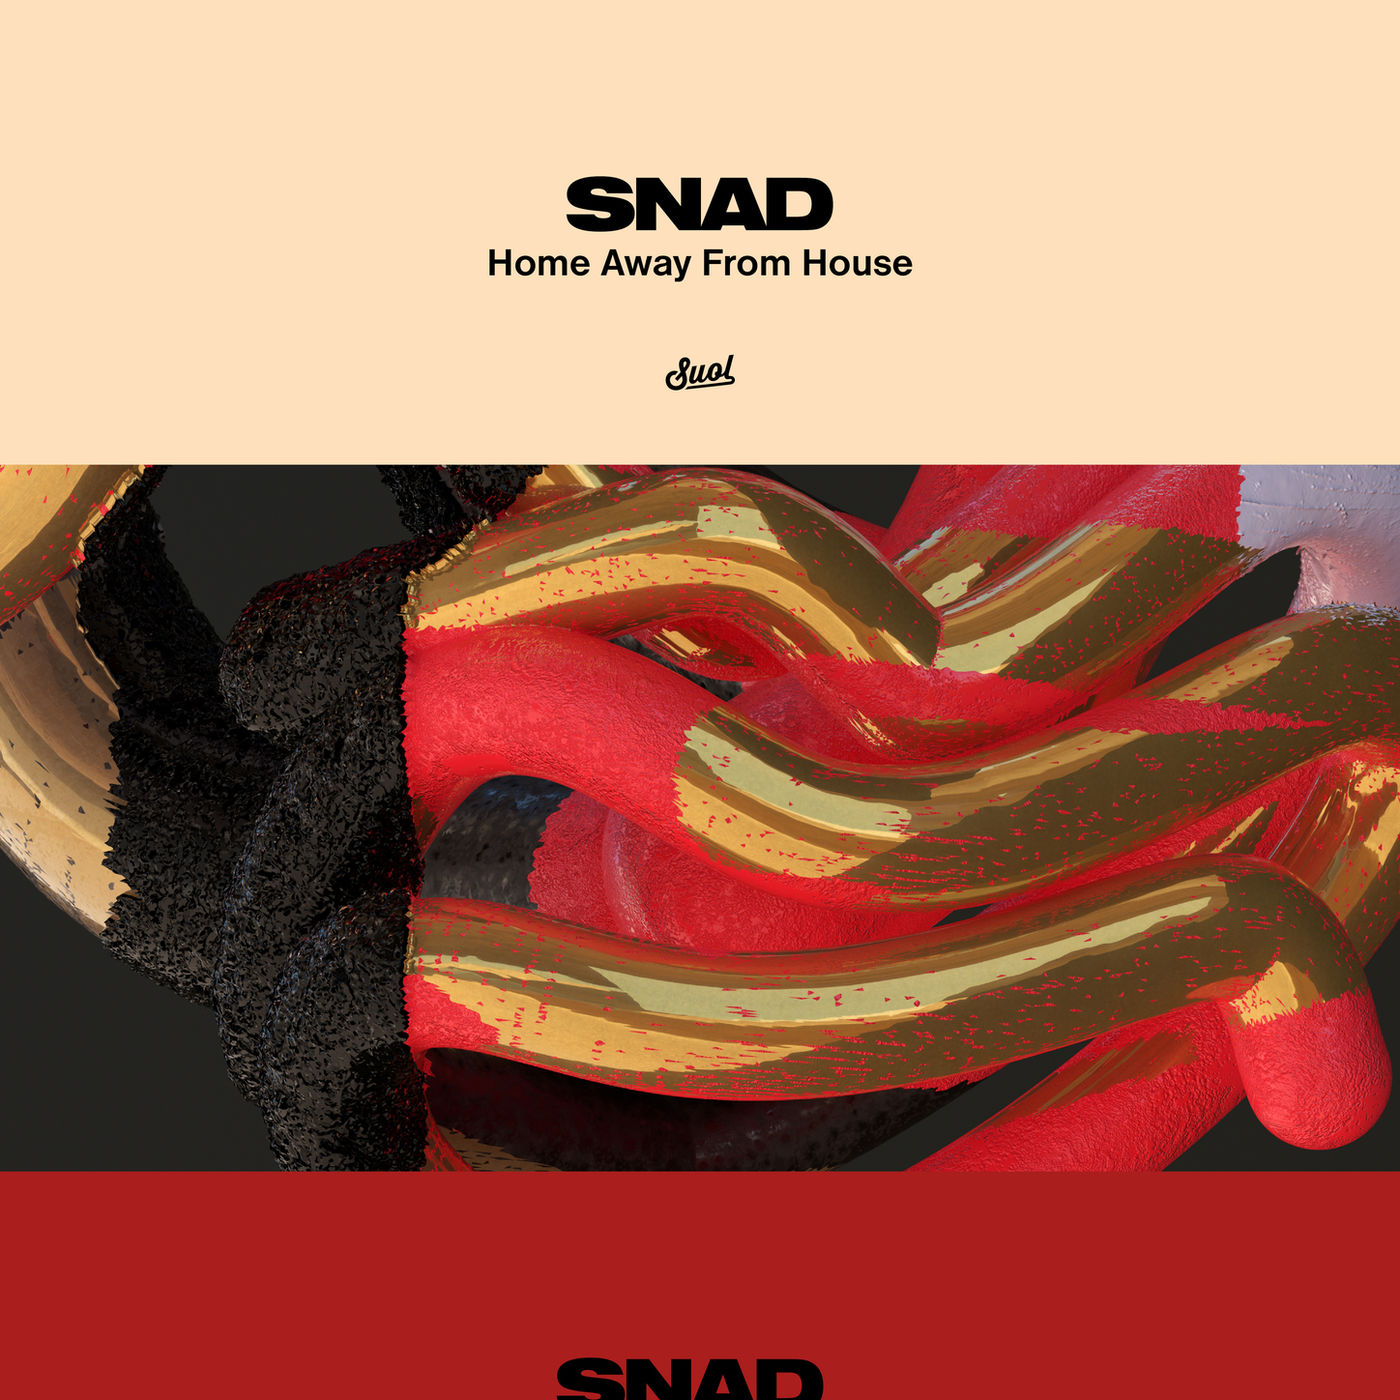 Snad - Home Away from House EP / Suol